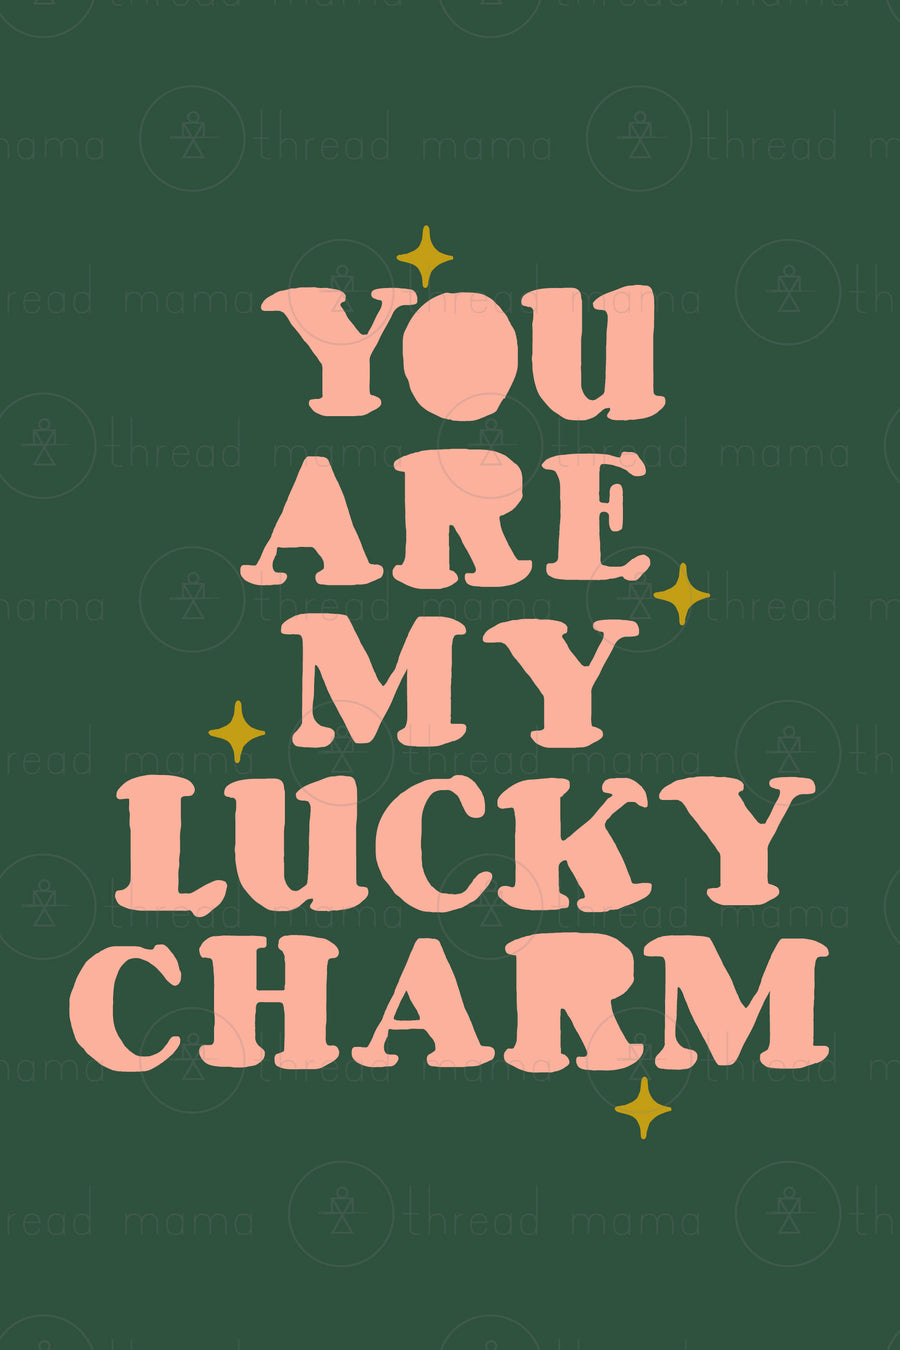 You Are My Lucky Charm